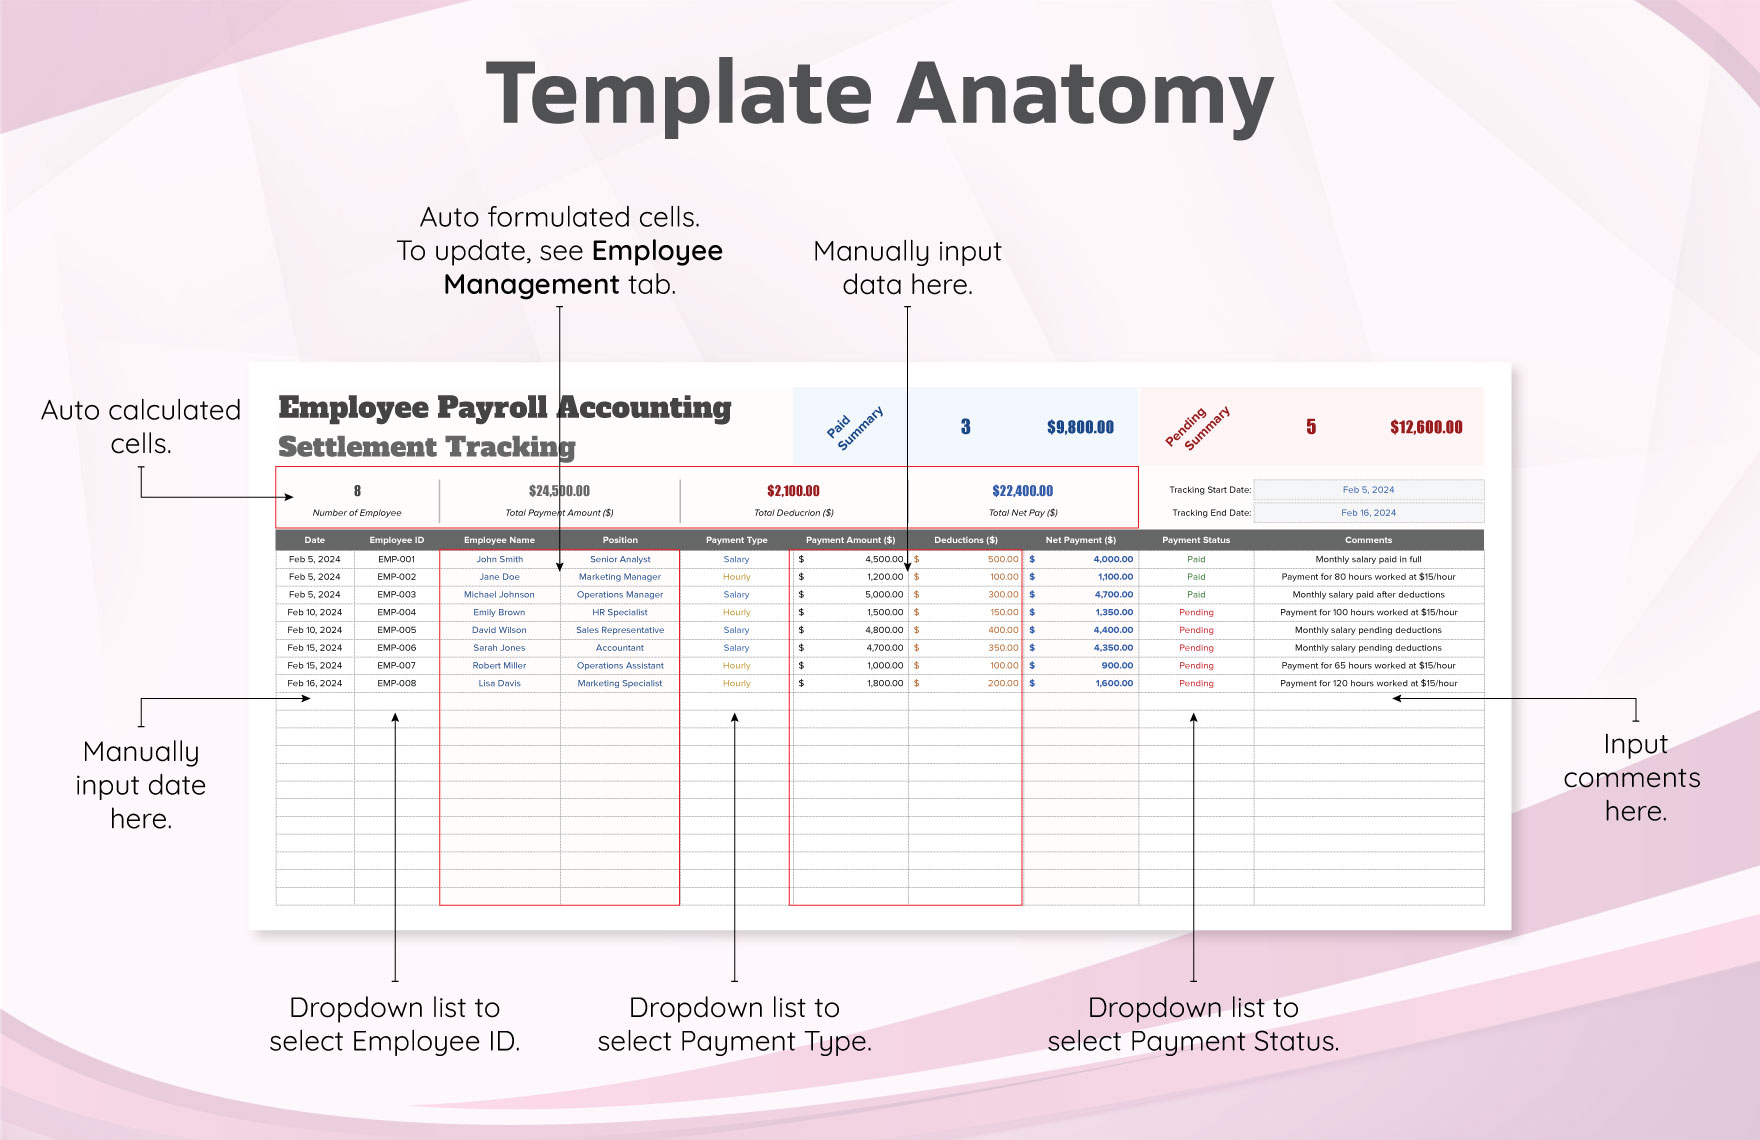 Employee Payroll Accounting Settlement Tracking Template